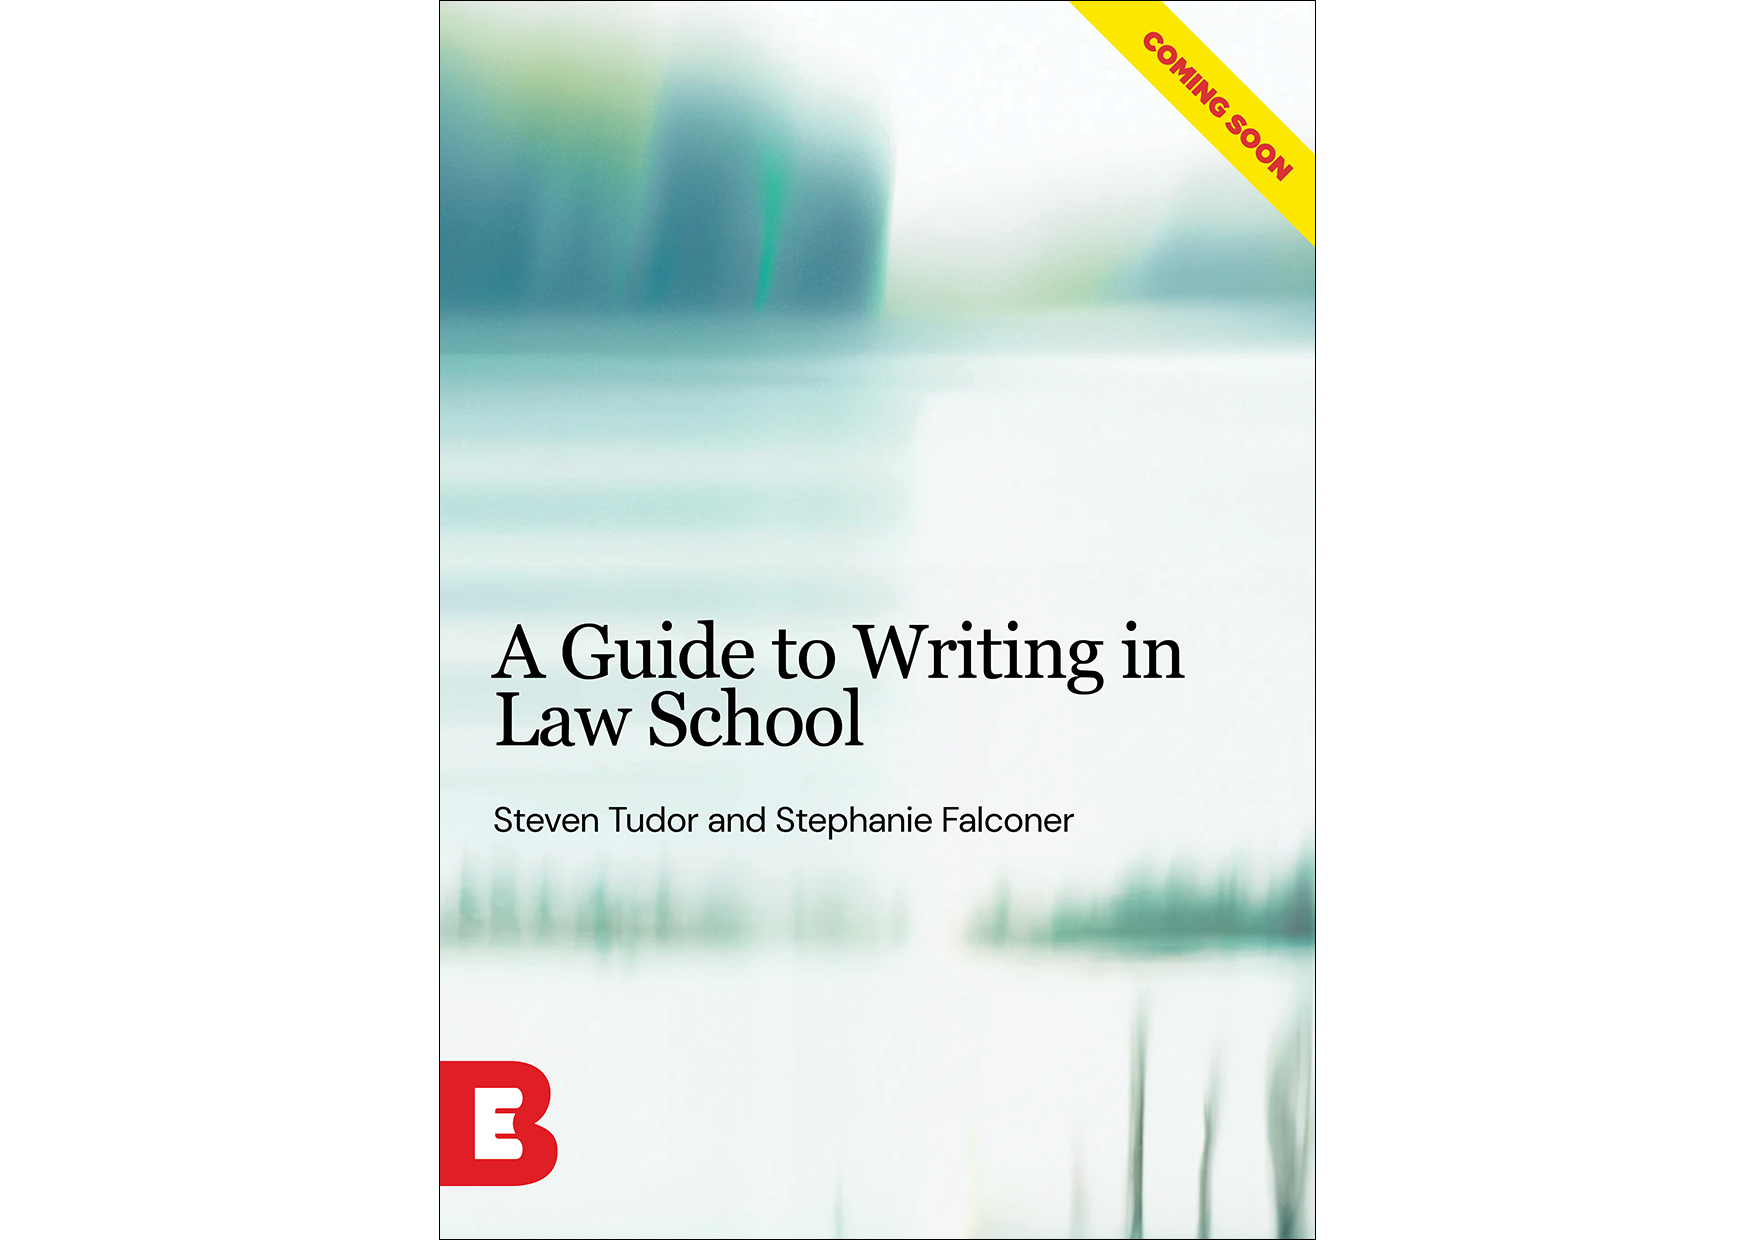 A Guide to writing in law school